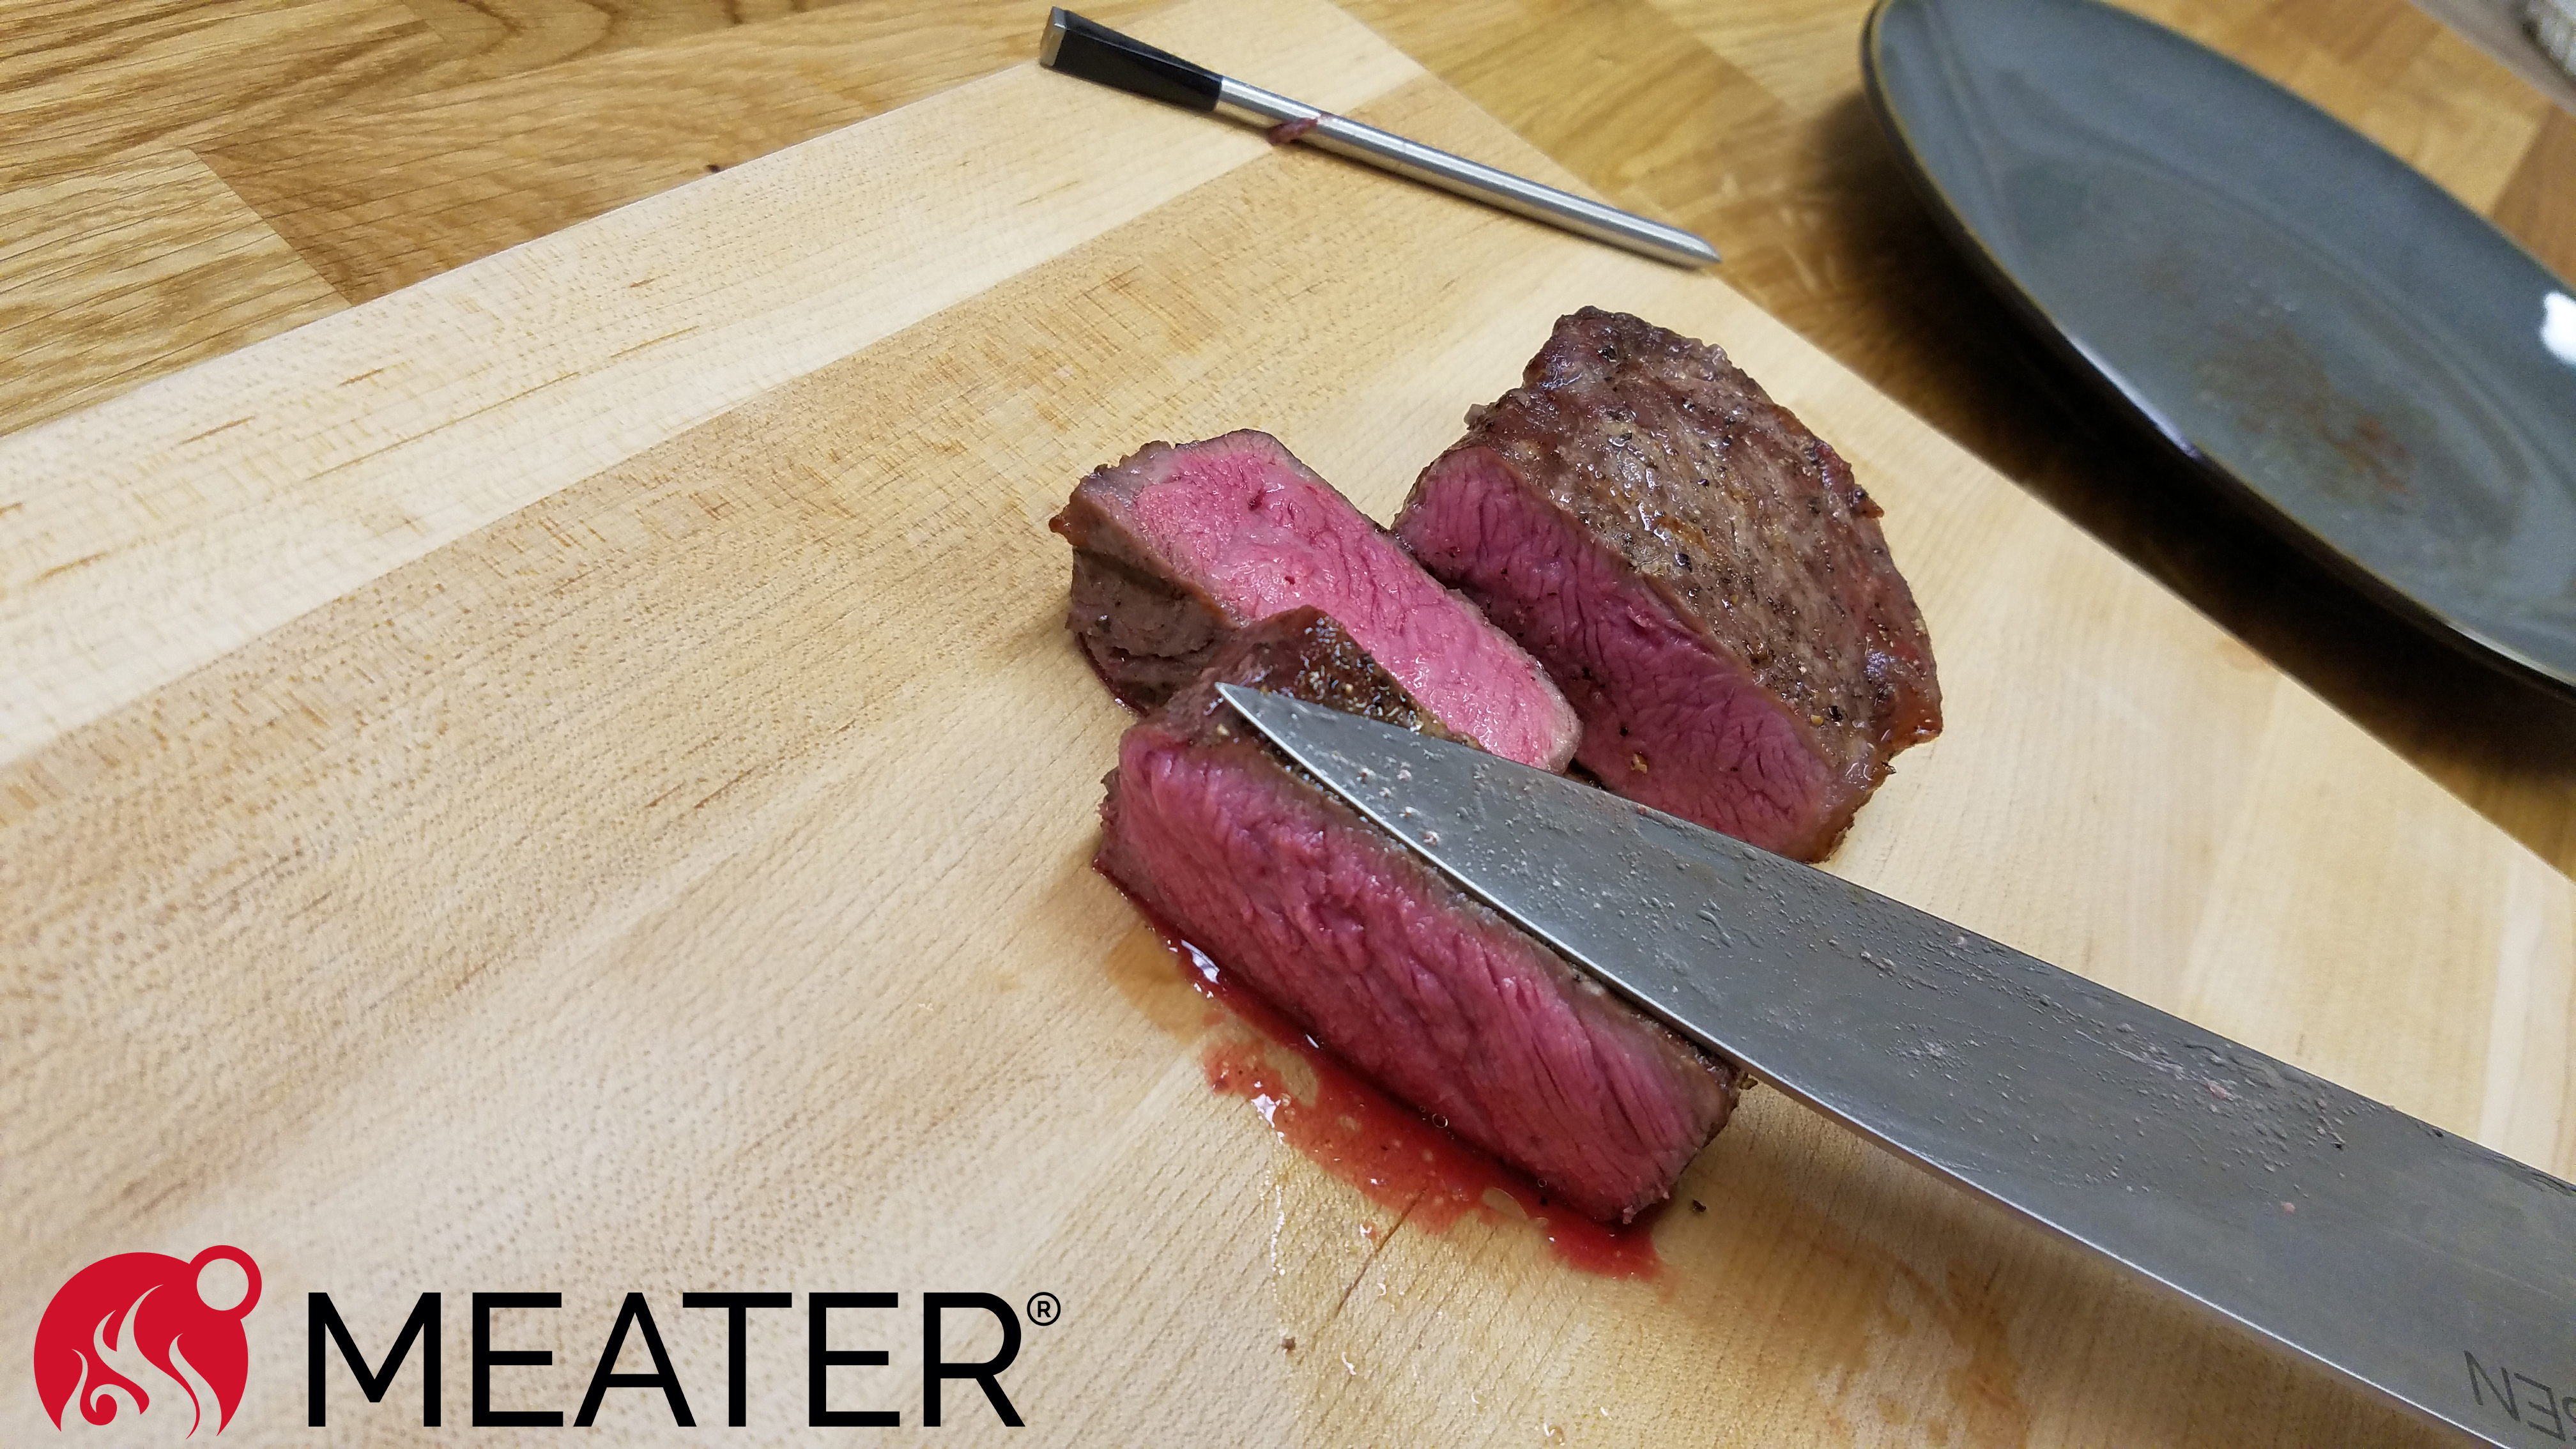 How to check your meat is cooked